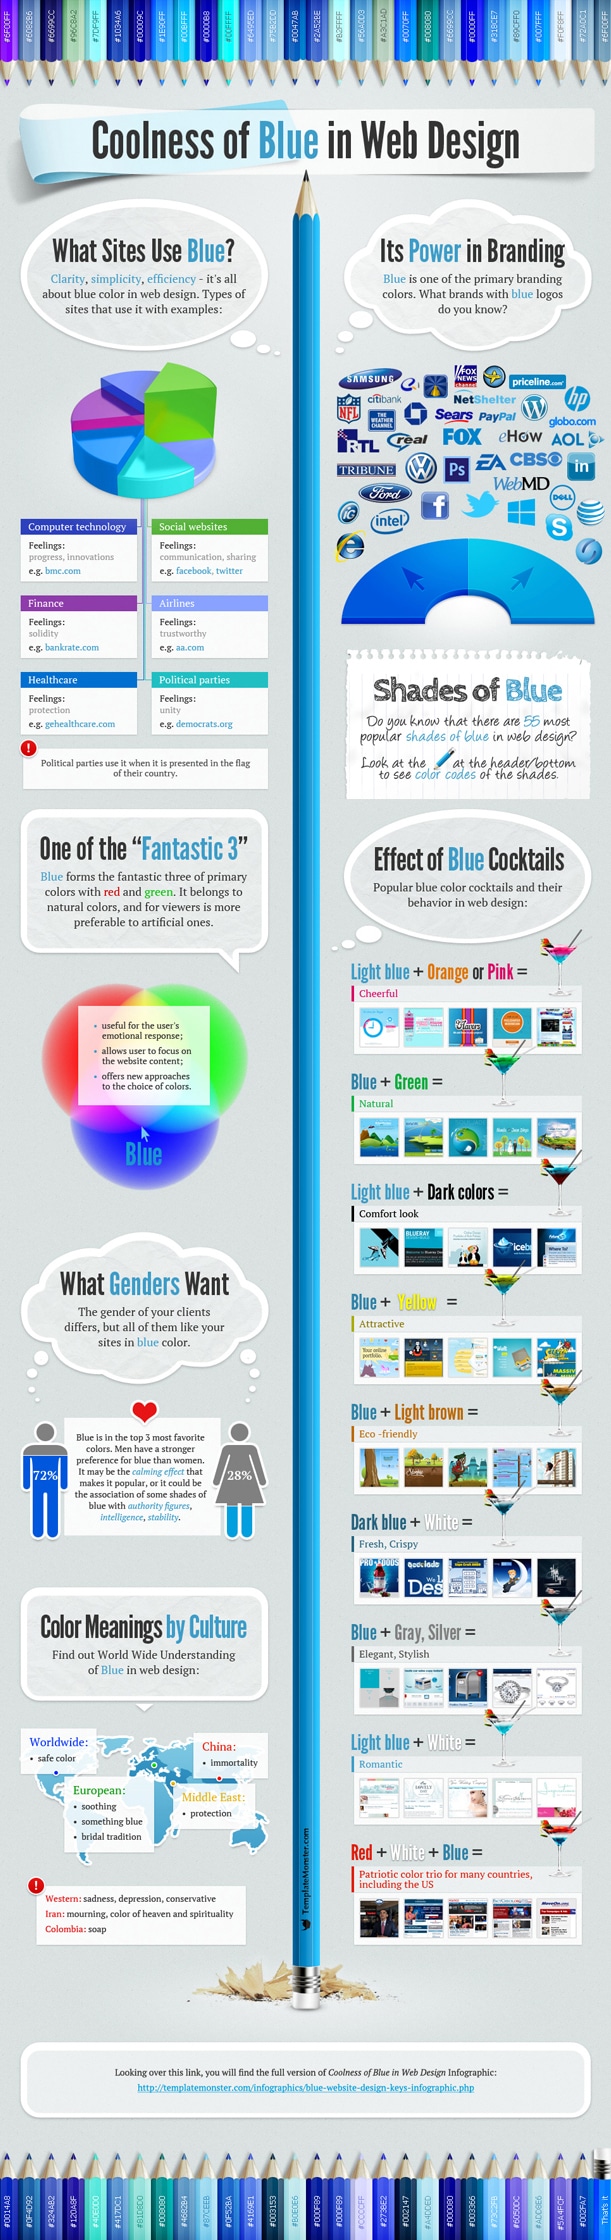 Why The Web’s Most Popular Color Is Blue [Infographic]